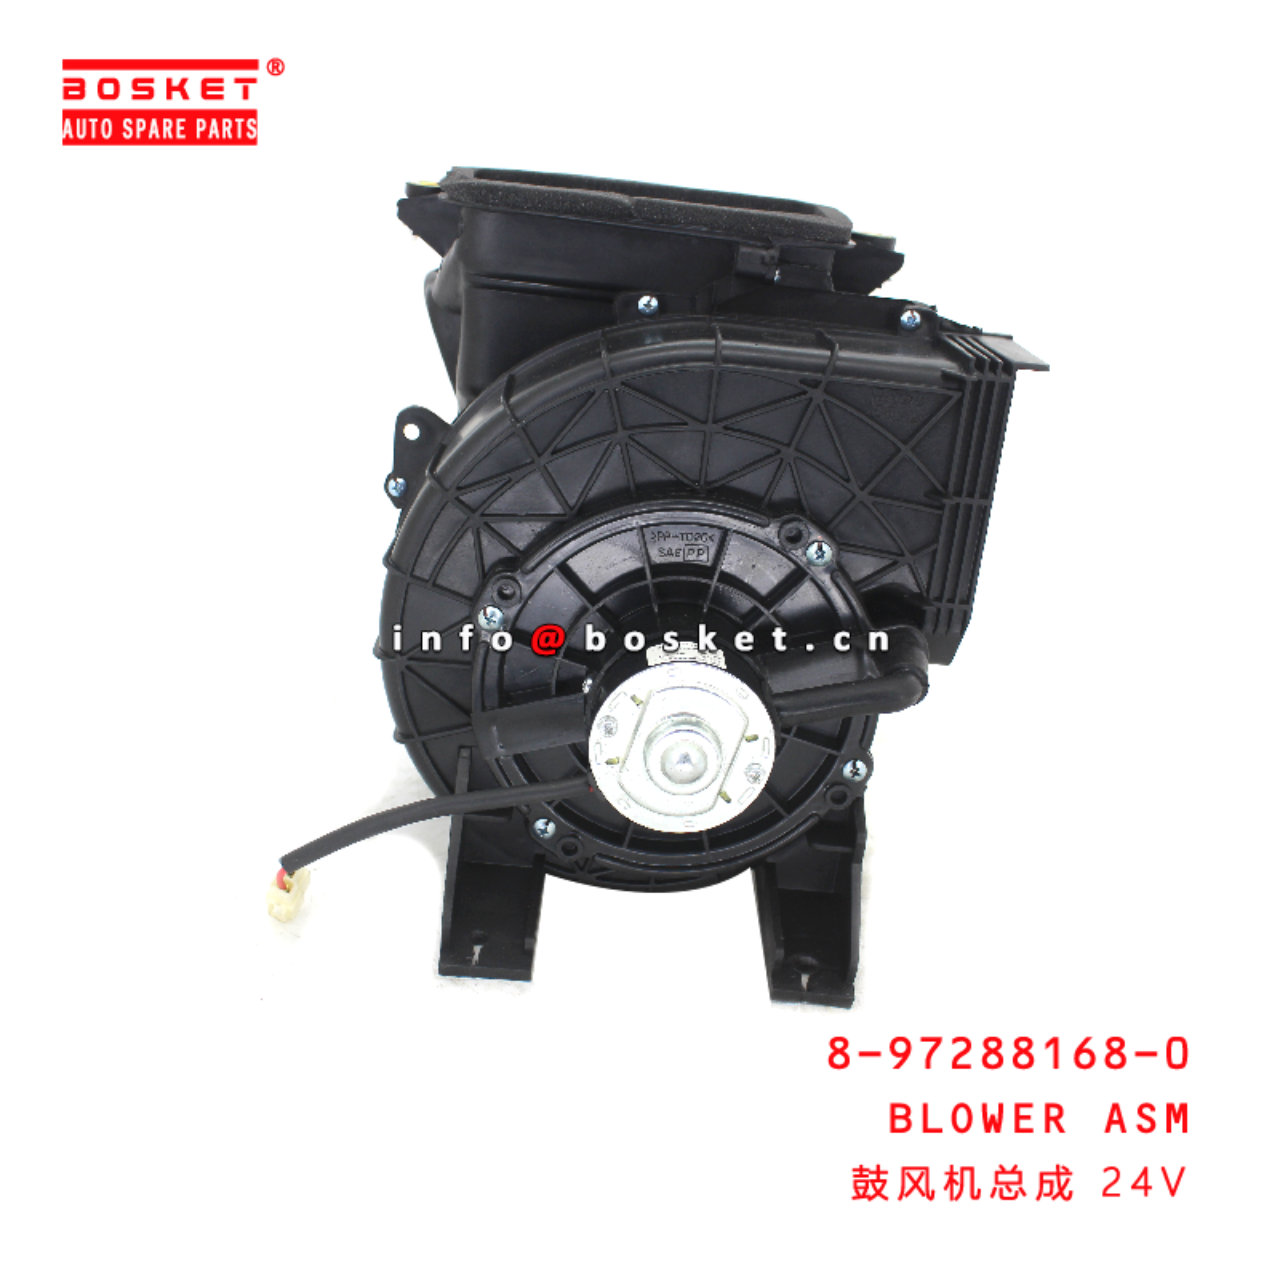 8-97288168-0 Blower Assembly suitable for ISUZU NQR71 8972881680